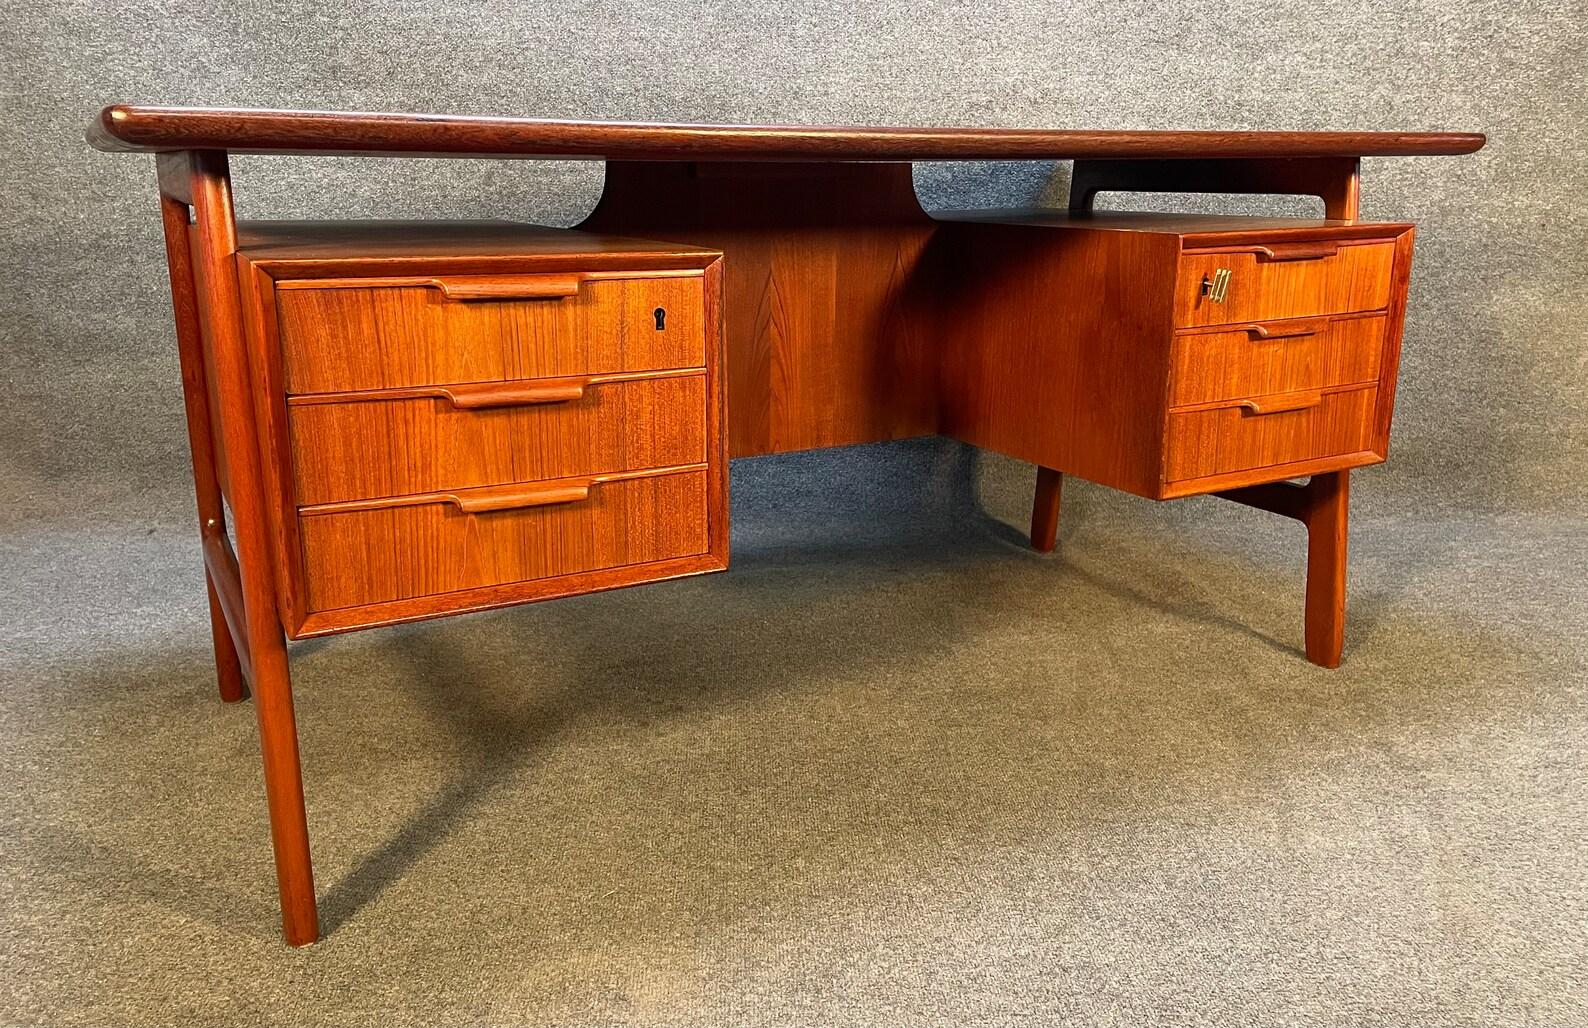 Here is the iconic Model 75 desk designed by Gunni Omann and manufactured by Omann Jun Mobelfabrik which was recently imported from Denmark to California before its restoration. This stunning 1960's Scandinavian modern desk in teak wood features a